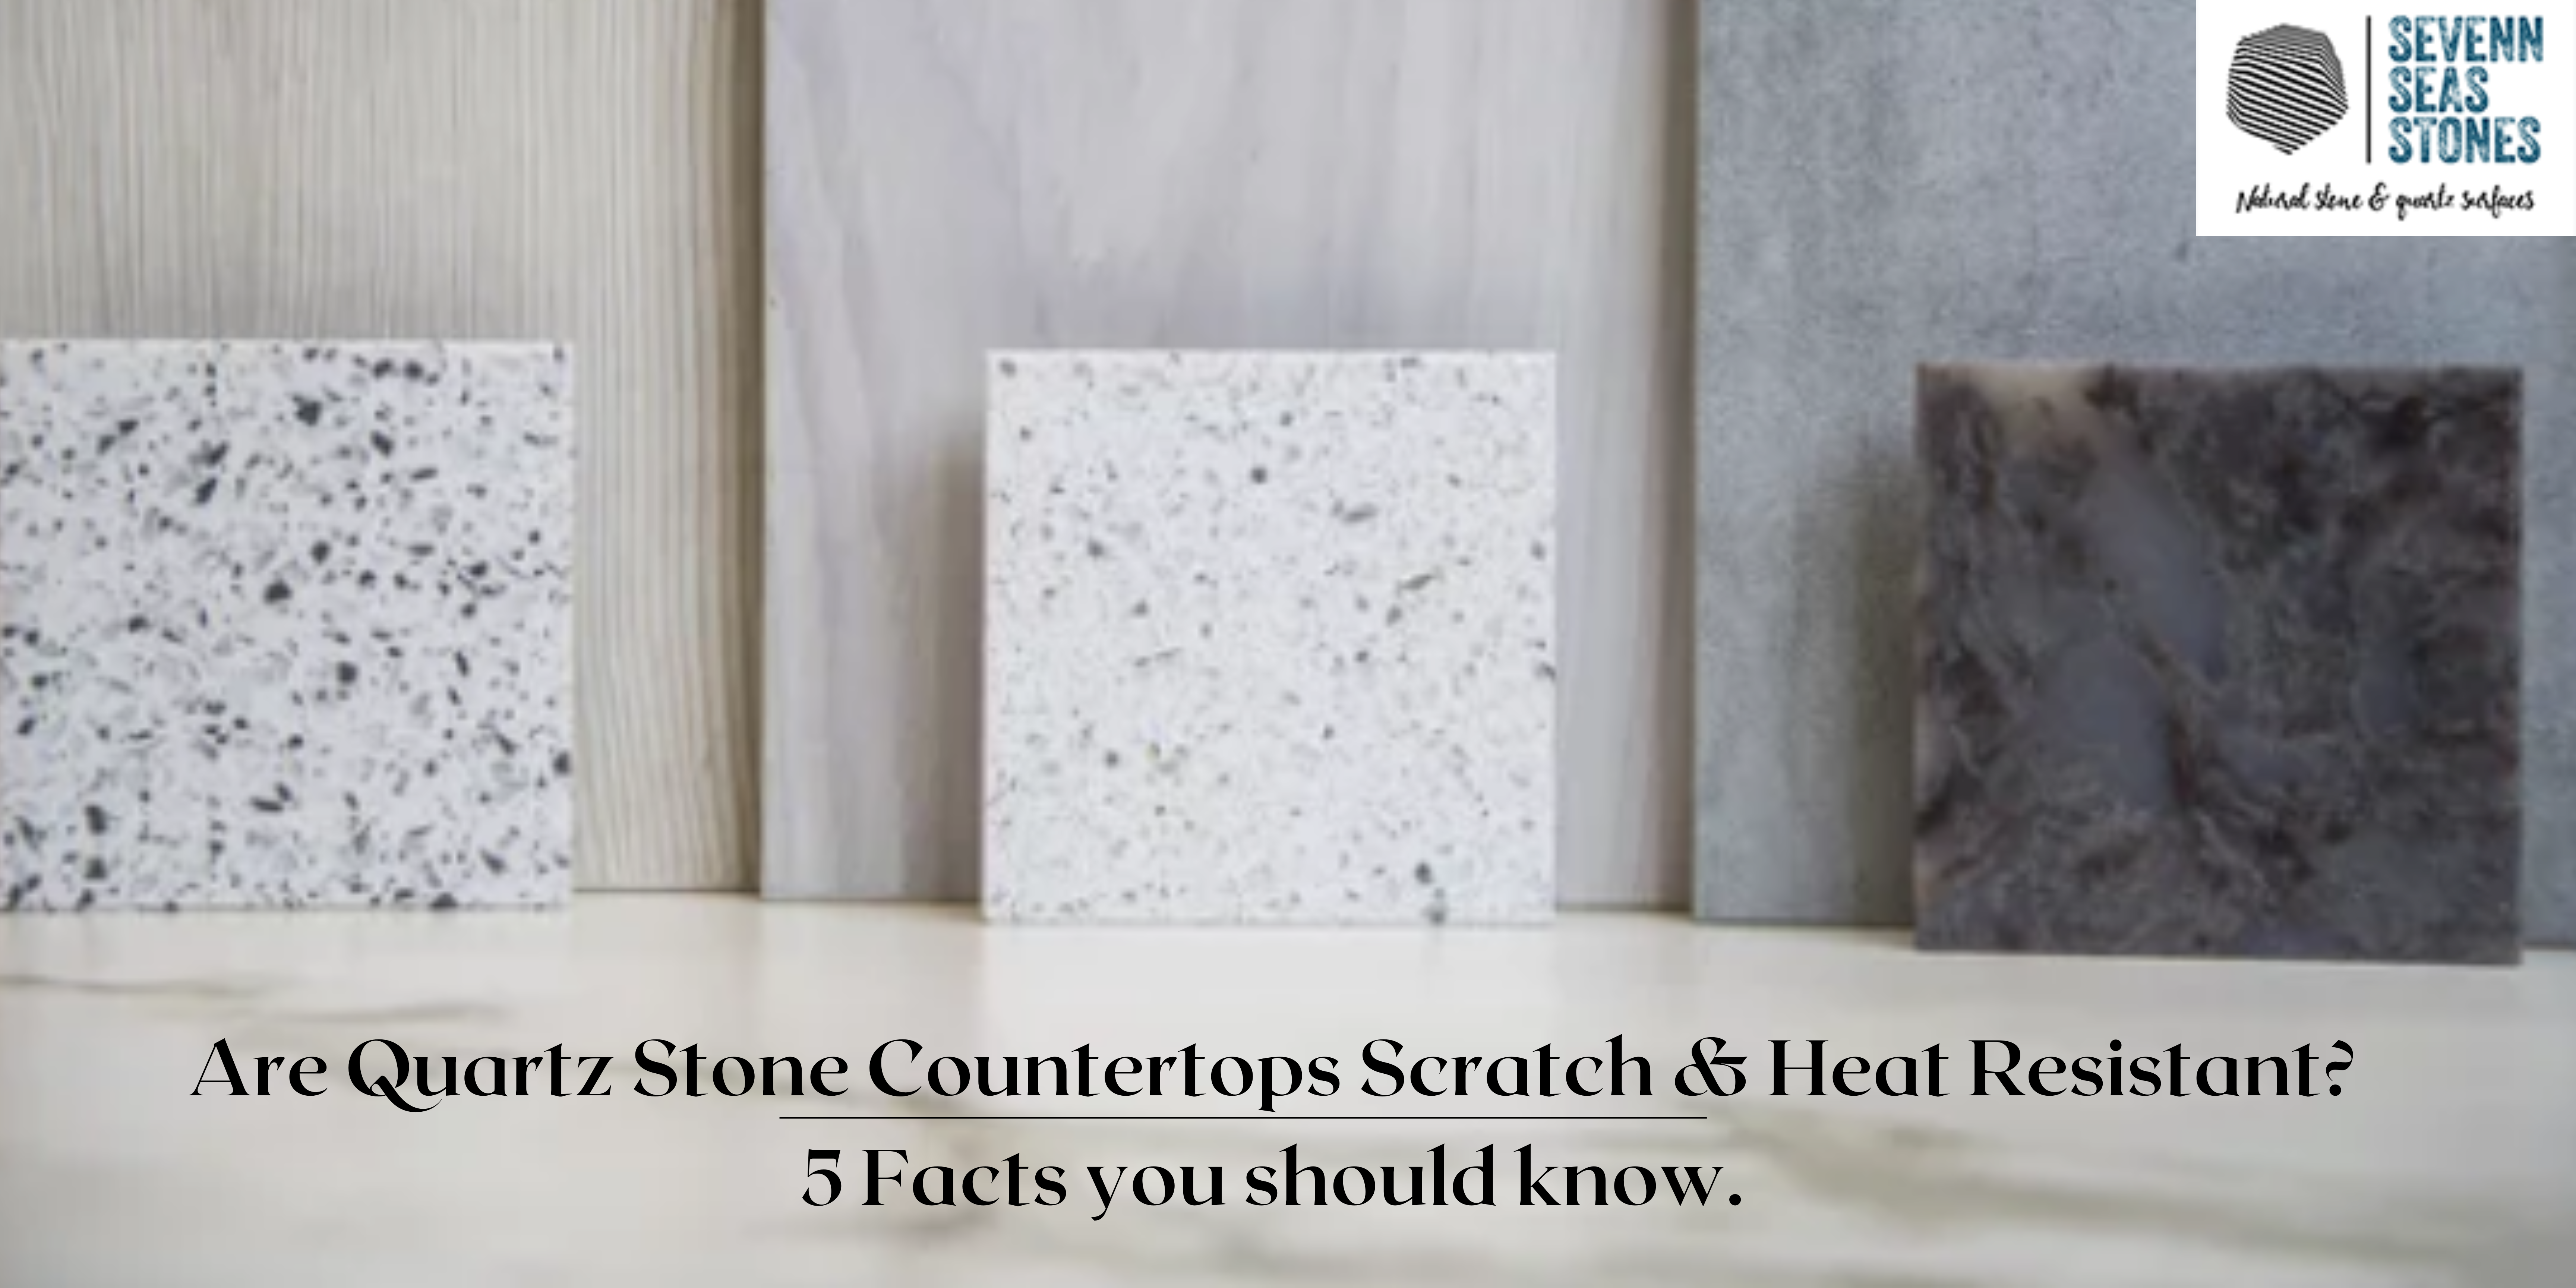 blog-Are Quartz Stone Countertops Scratch & Heat Resistant? 5 Facts You Should Know